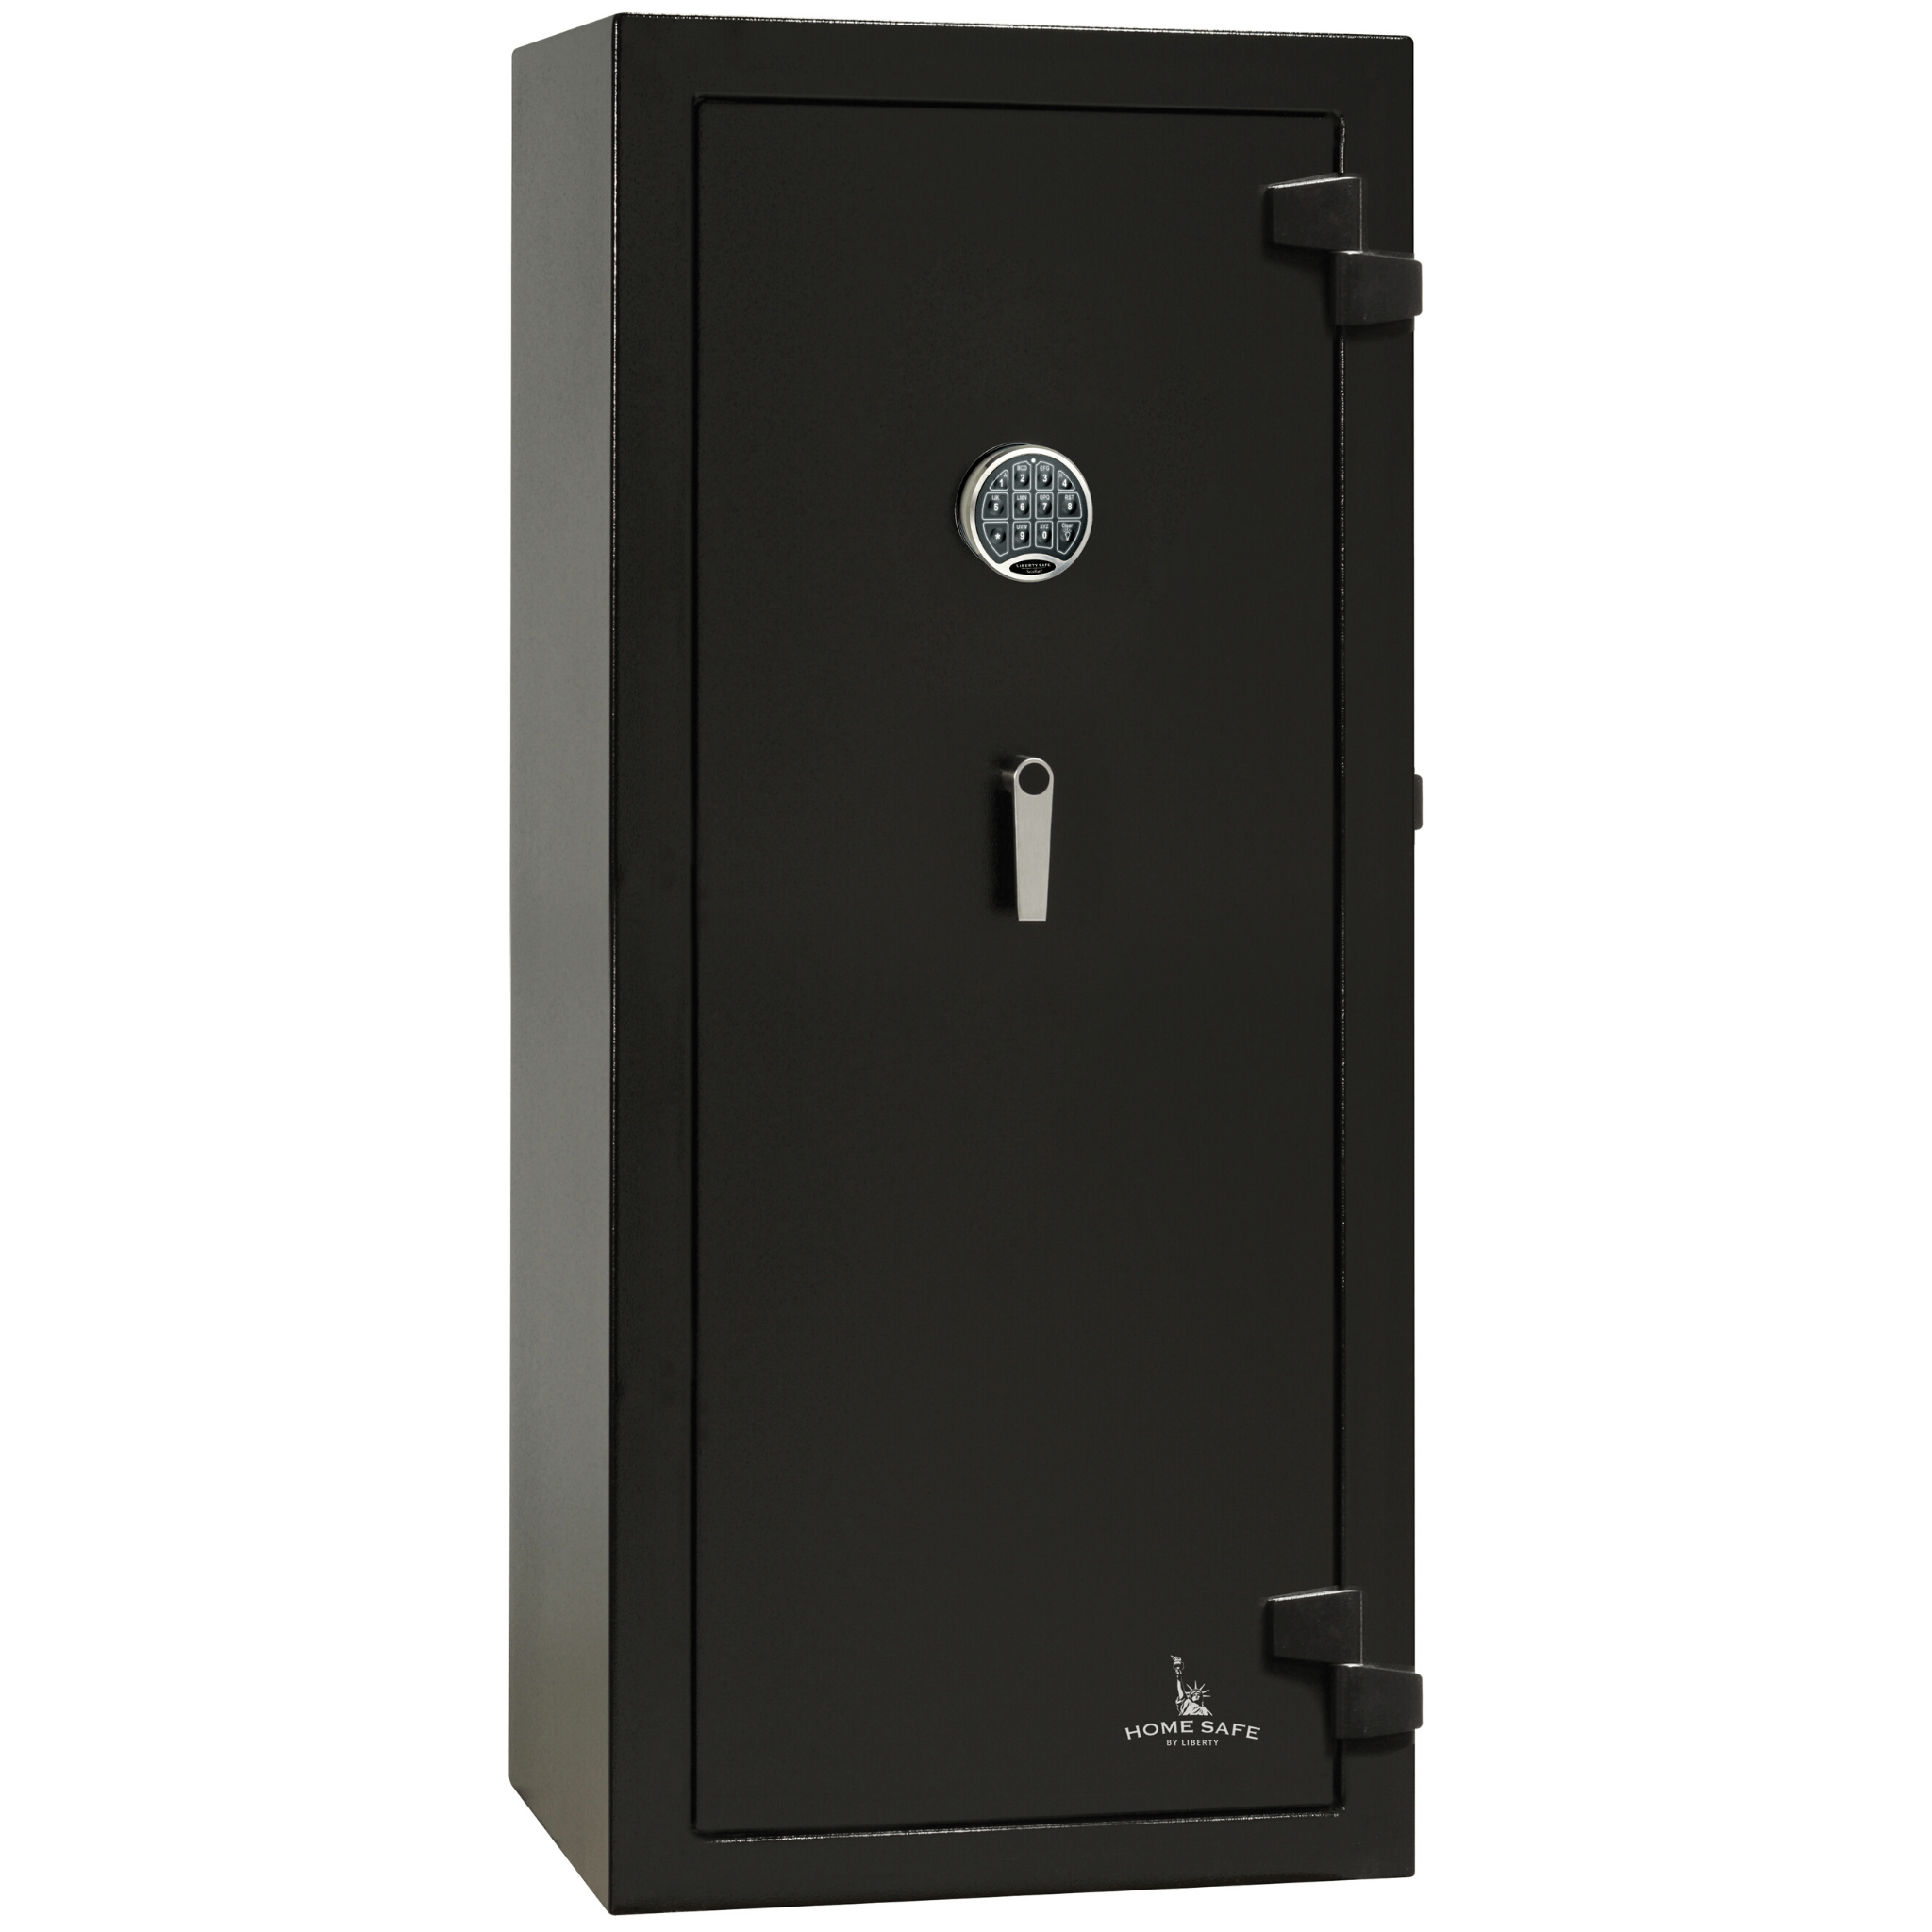 Home Safe | 17 | 60 Minute Fire Protection | Black | Electronic Lock | Dimensions: 59"(H) x 24.25"(W) x 22"(D)